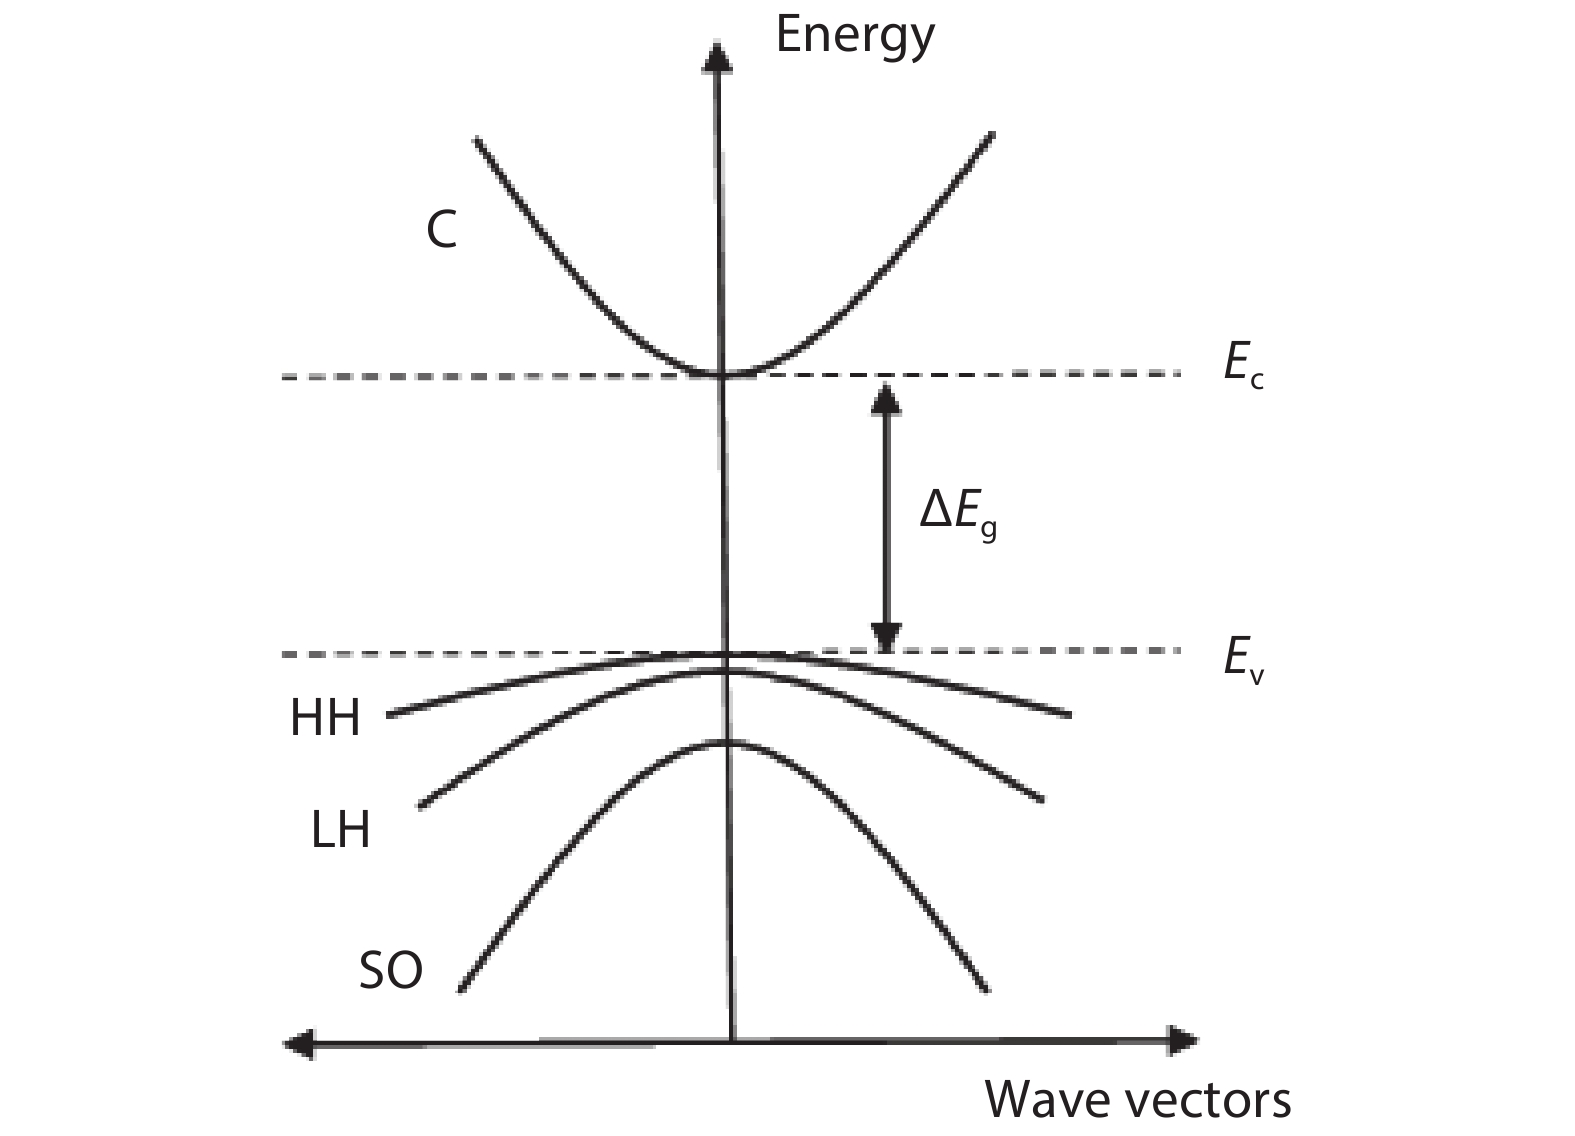 Schematic diagram showing the energy band states in the QW: conduction (C), heavy-hole (HH), light-hole (LH), and split-off (SO).